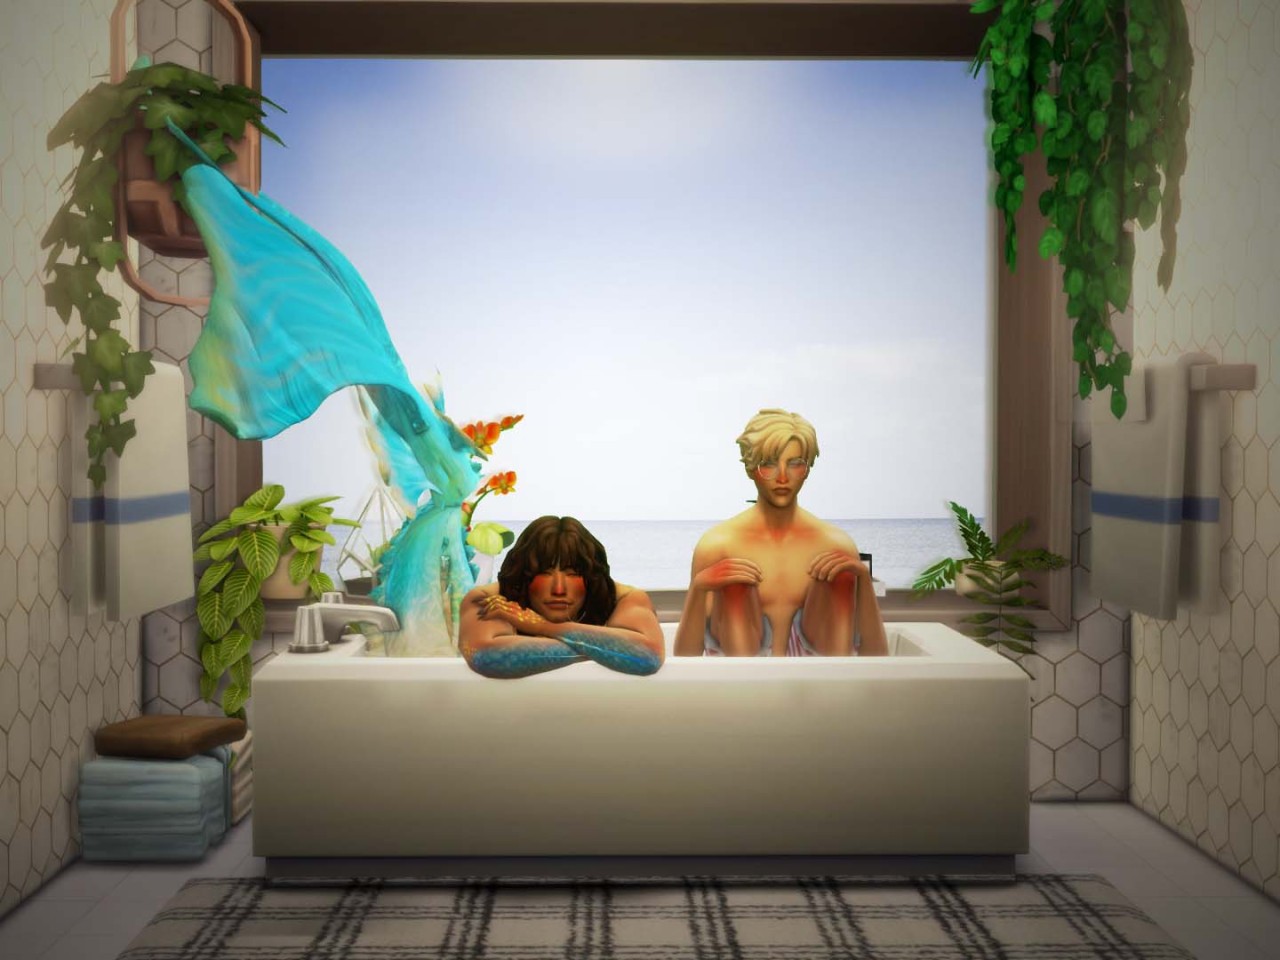 Well run away together
Well spend some time forever
Well never feel bad anymore #sims 4#ts4 #sims 4 edit #ts4 edit #the sims 4  #31 days of merfolk  #31 days of merfolk 2022  #thats the emma roberts version of the island in the sun from the aquamarine movie  #cuz this gave me aquamarine vibes  #was there a tub scene in aquamarine or am i confusing it with a dif movie??  #but his tail is similar to hers so eh  #also also 13th year?? best mermaid movie  #that one is always a fav  #GOD now i wanna watch the 13th year  #anyway this edit is cute lmao  #think its bishops first edit?? maybe?? i think so #garcia outtakes#bishop ratcliffe#jax payton